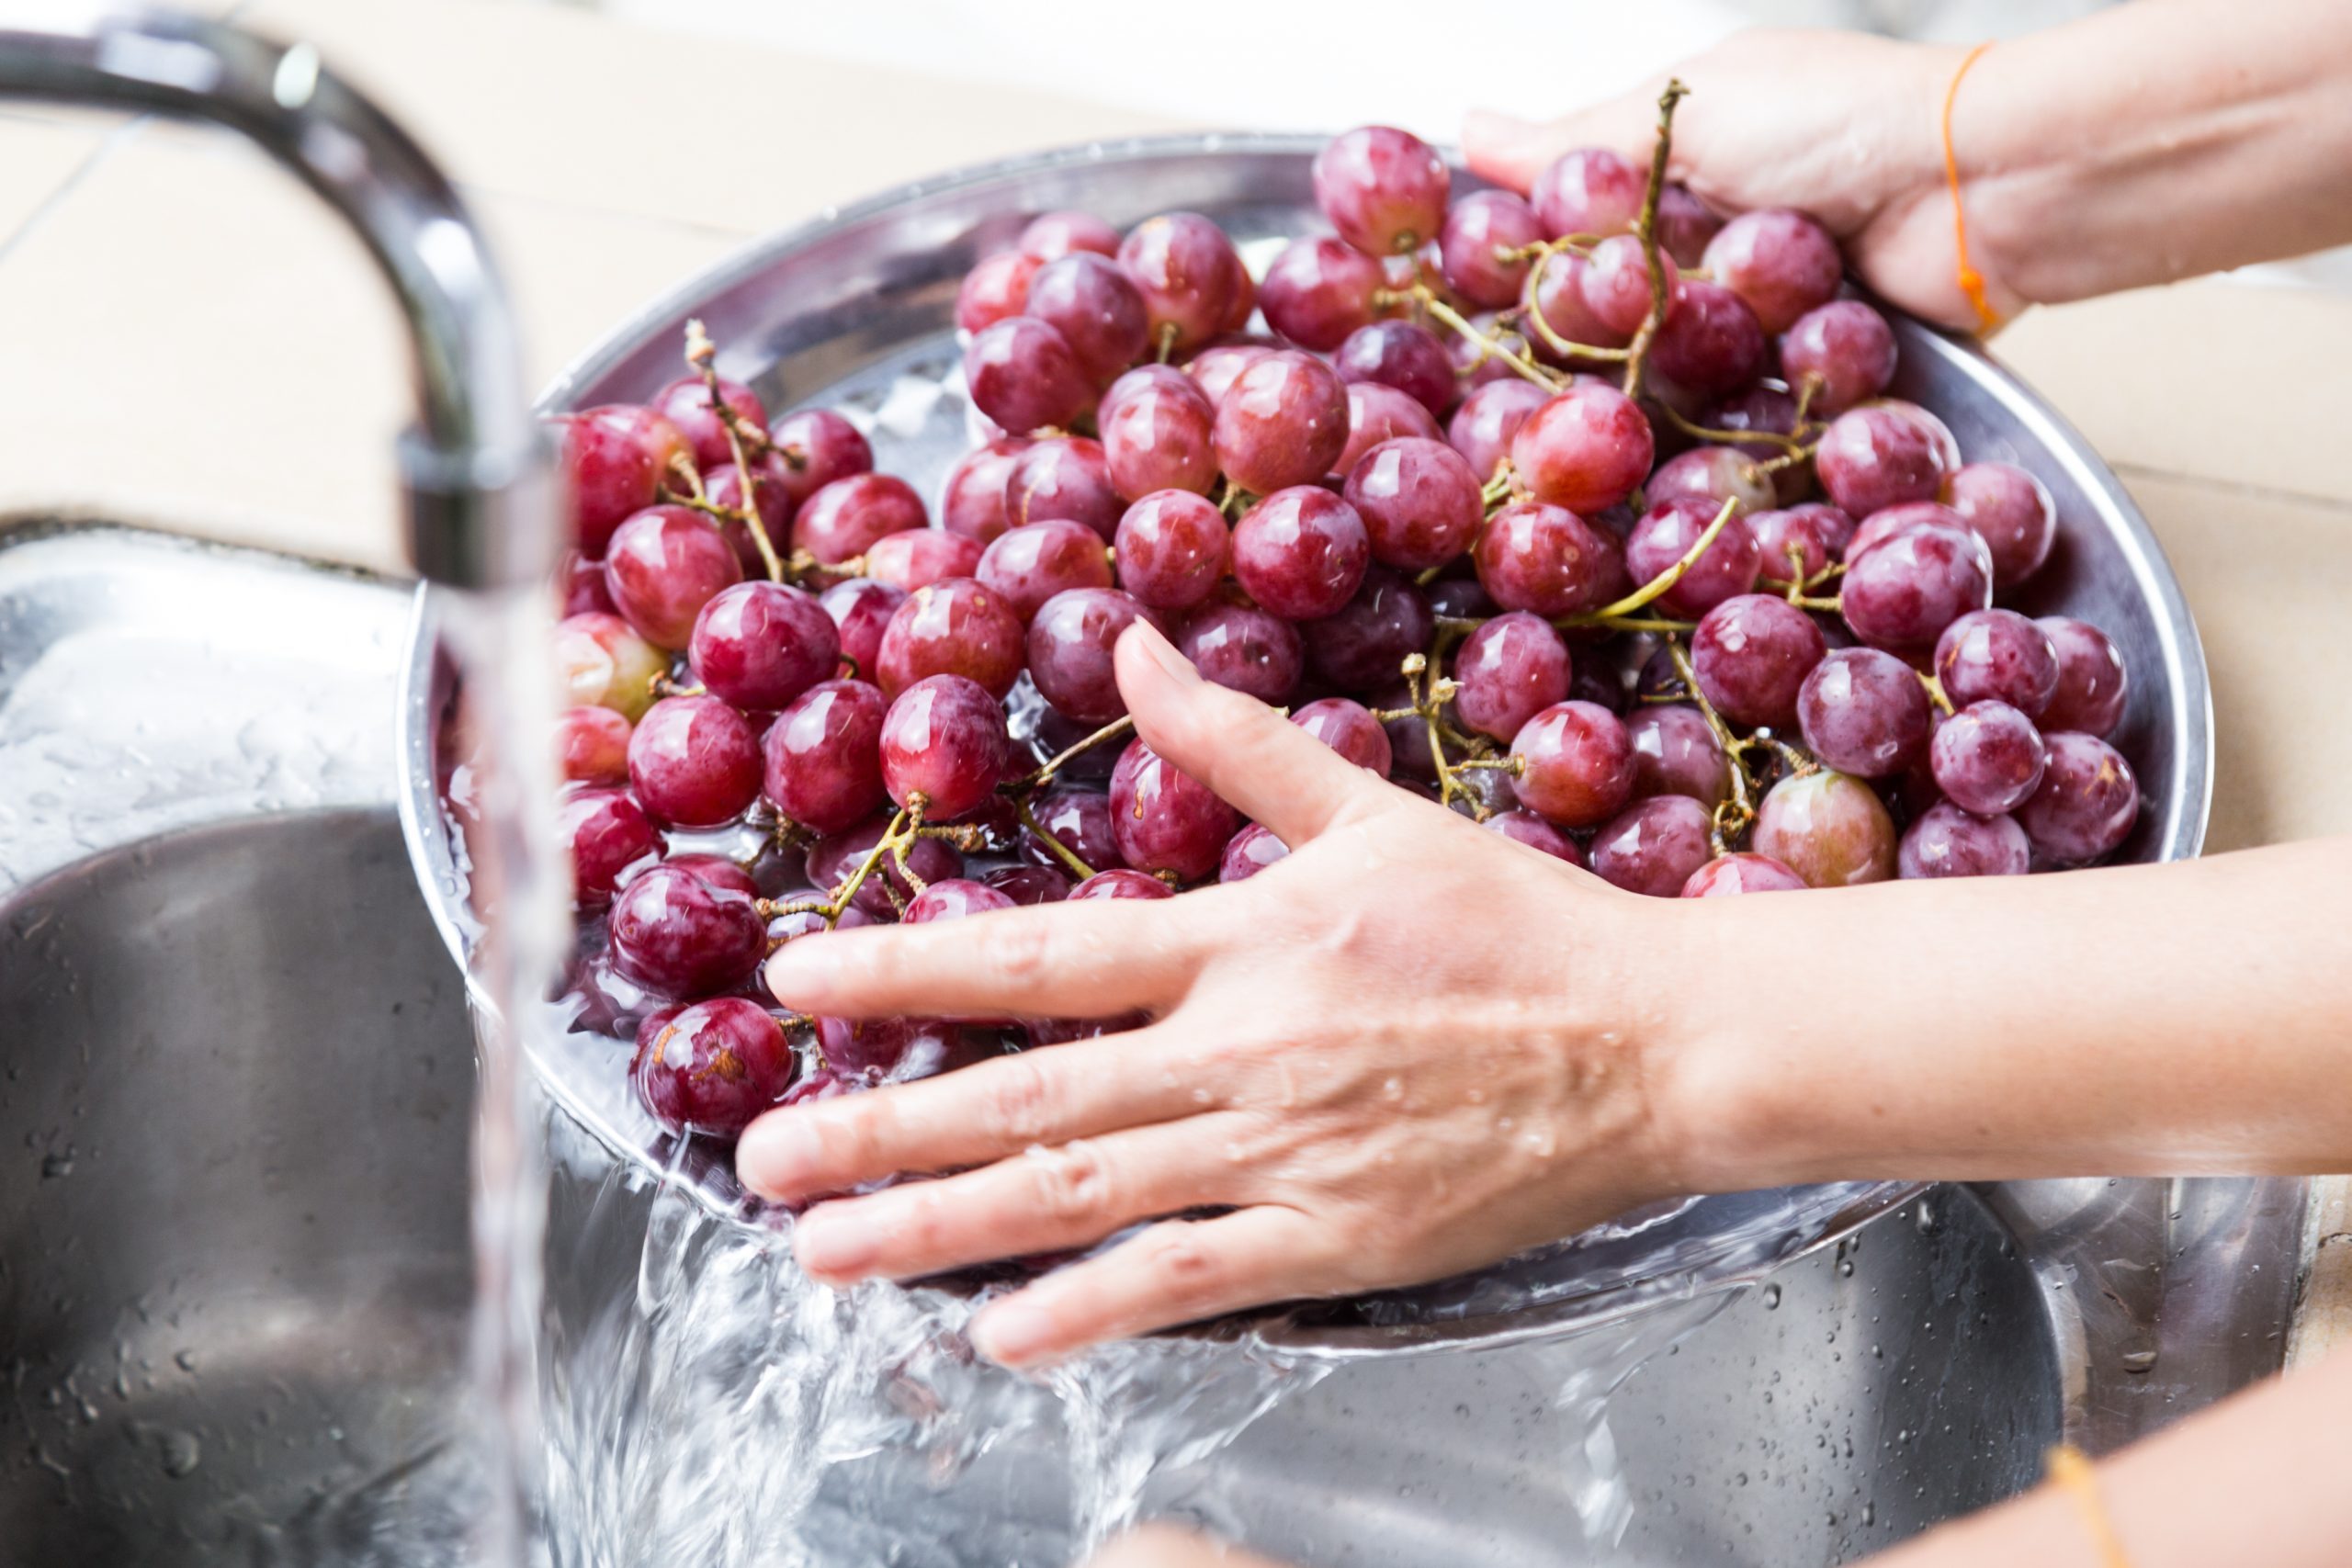 How To Wash Grapes? - Classified Mom